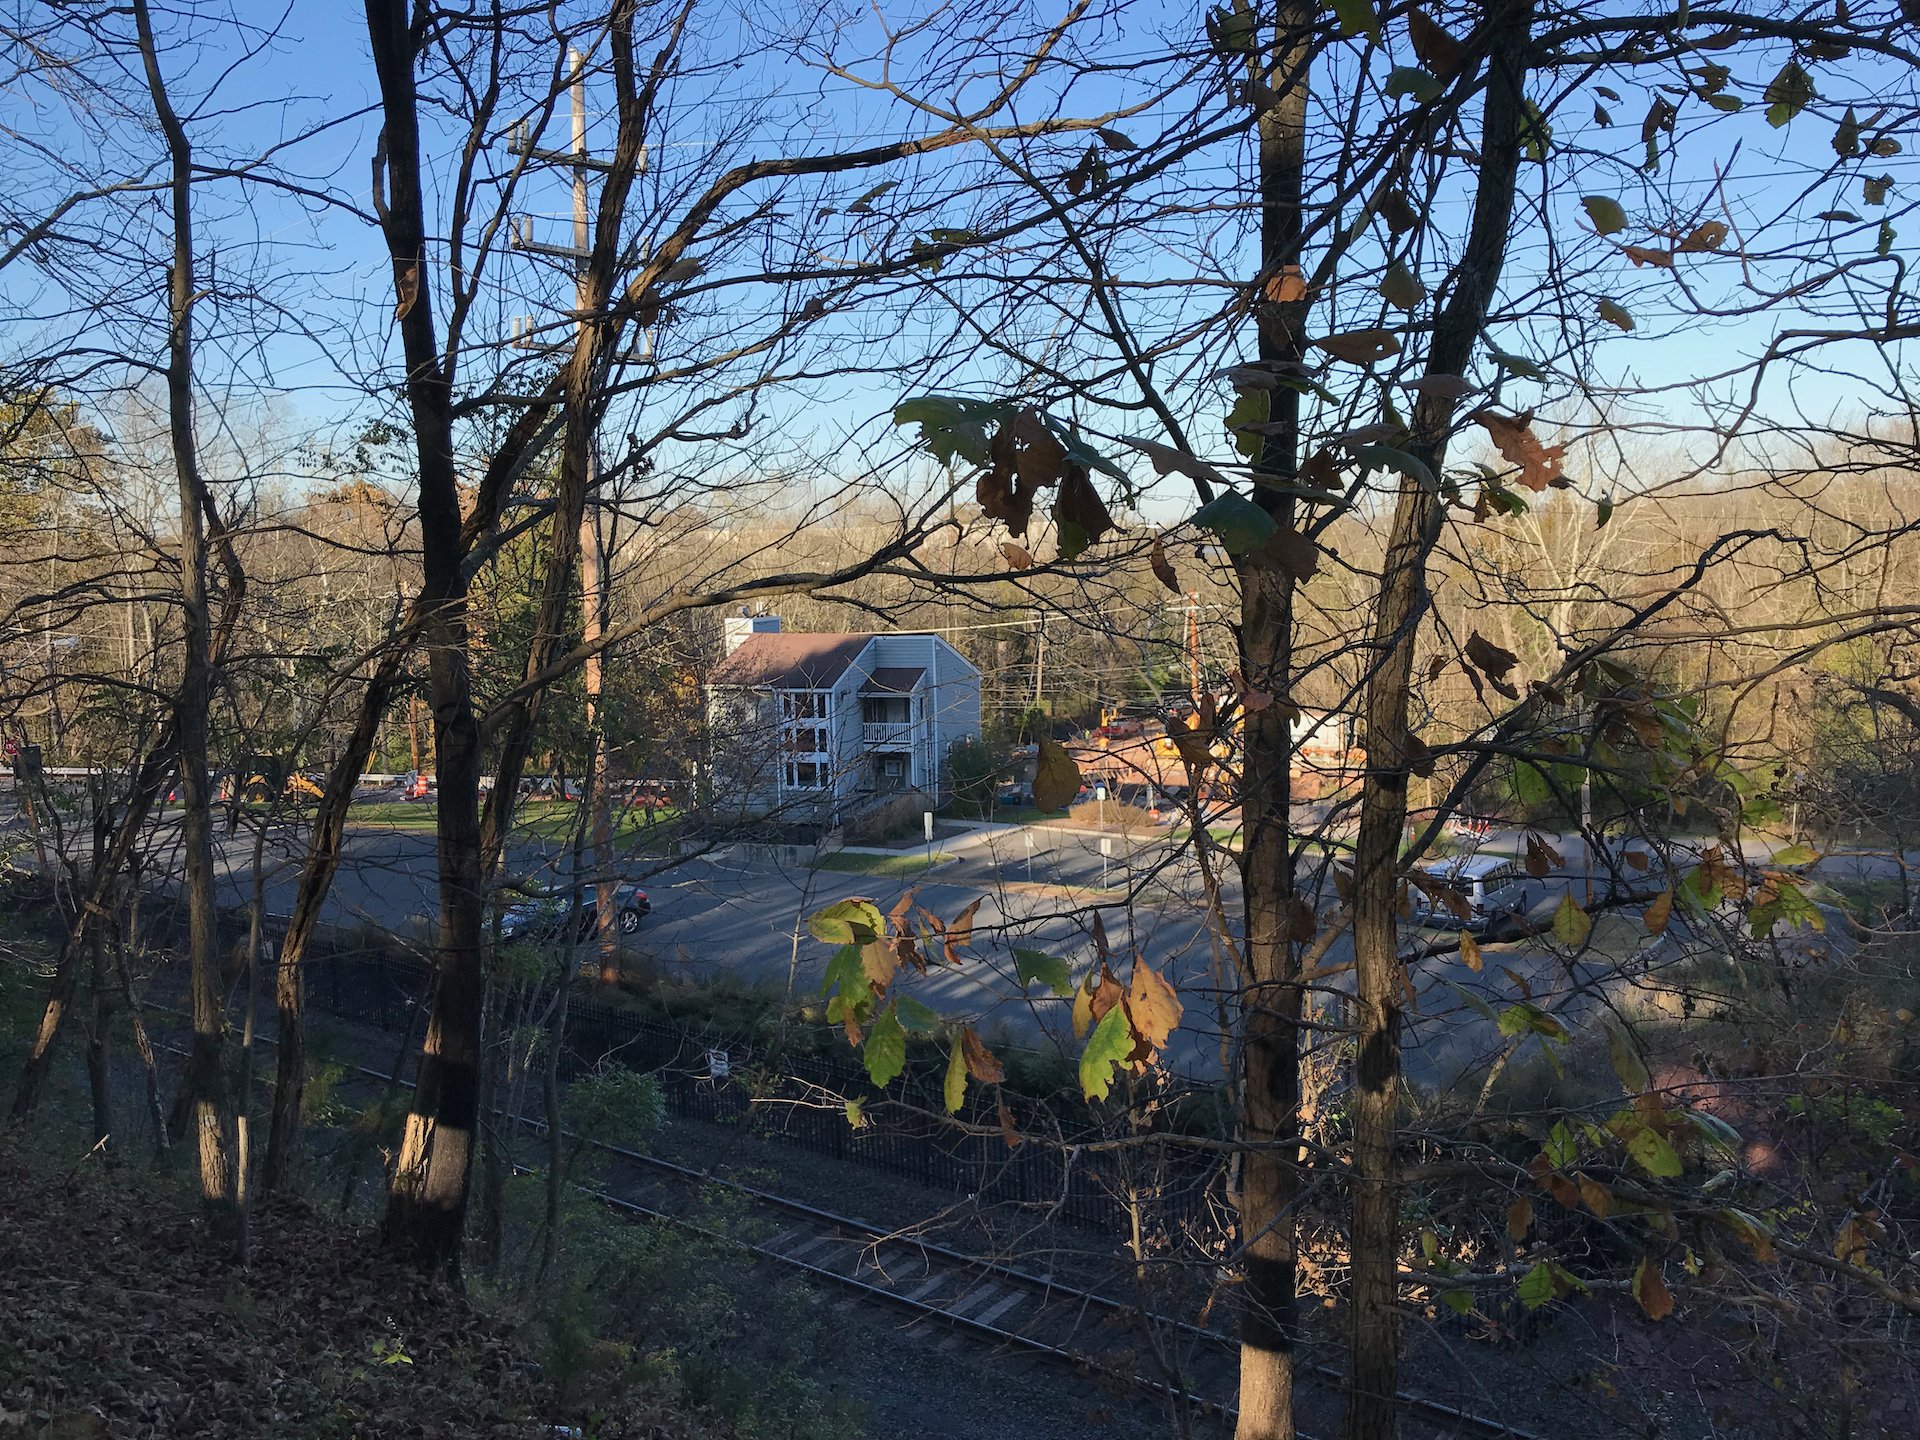 Frontline Arts' building viewed through trees, above train tracks, on Lenapehoking